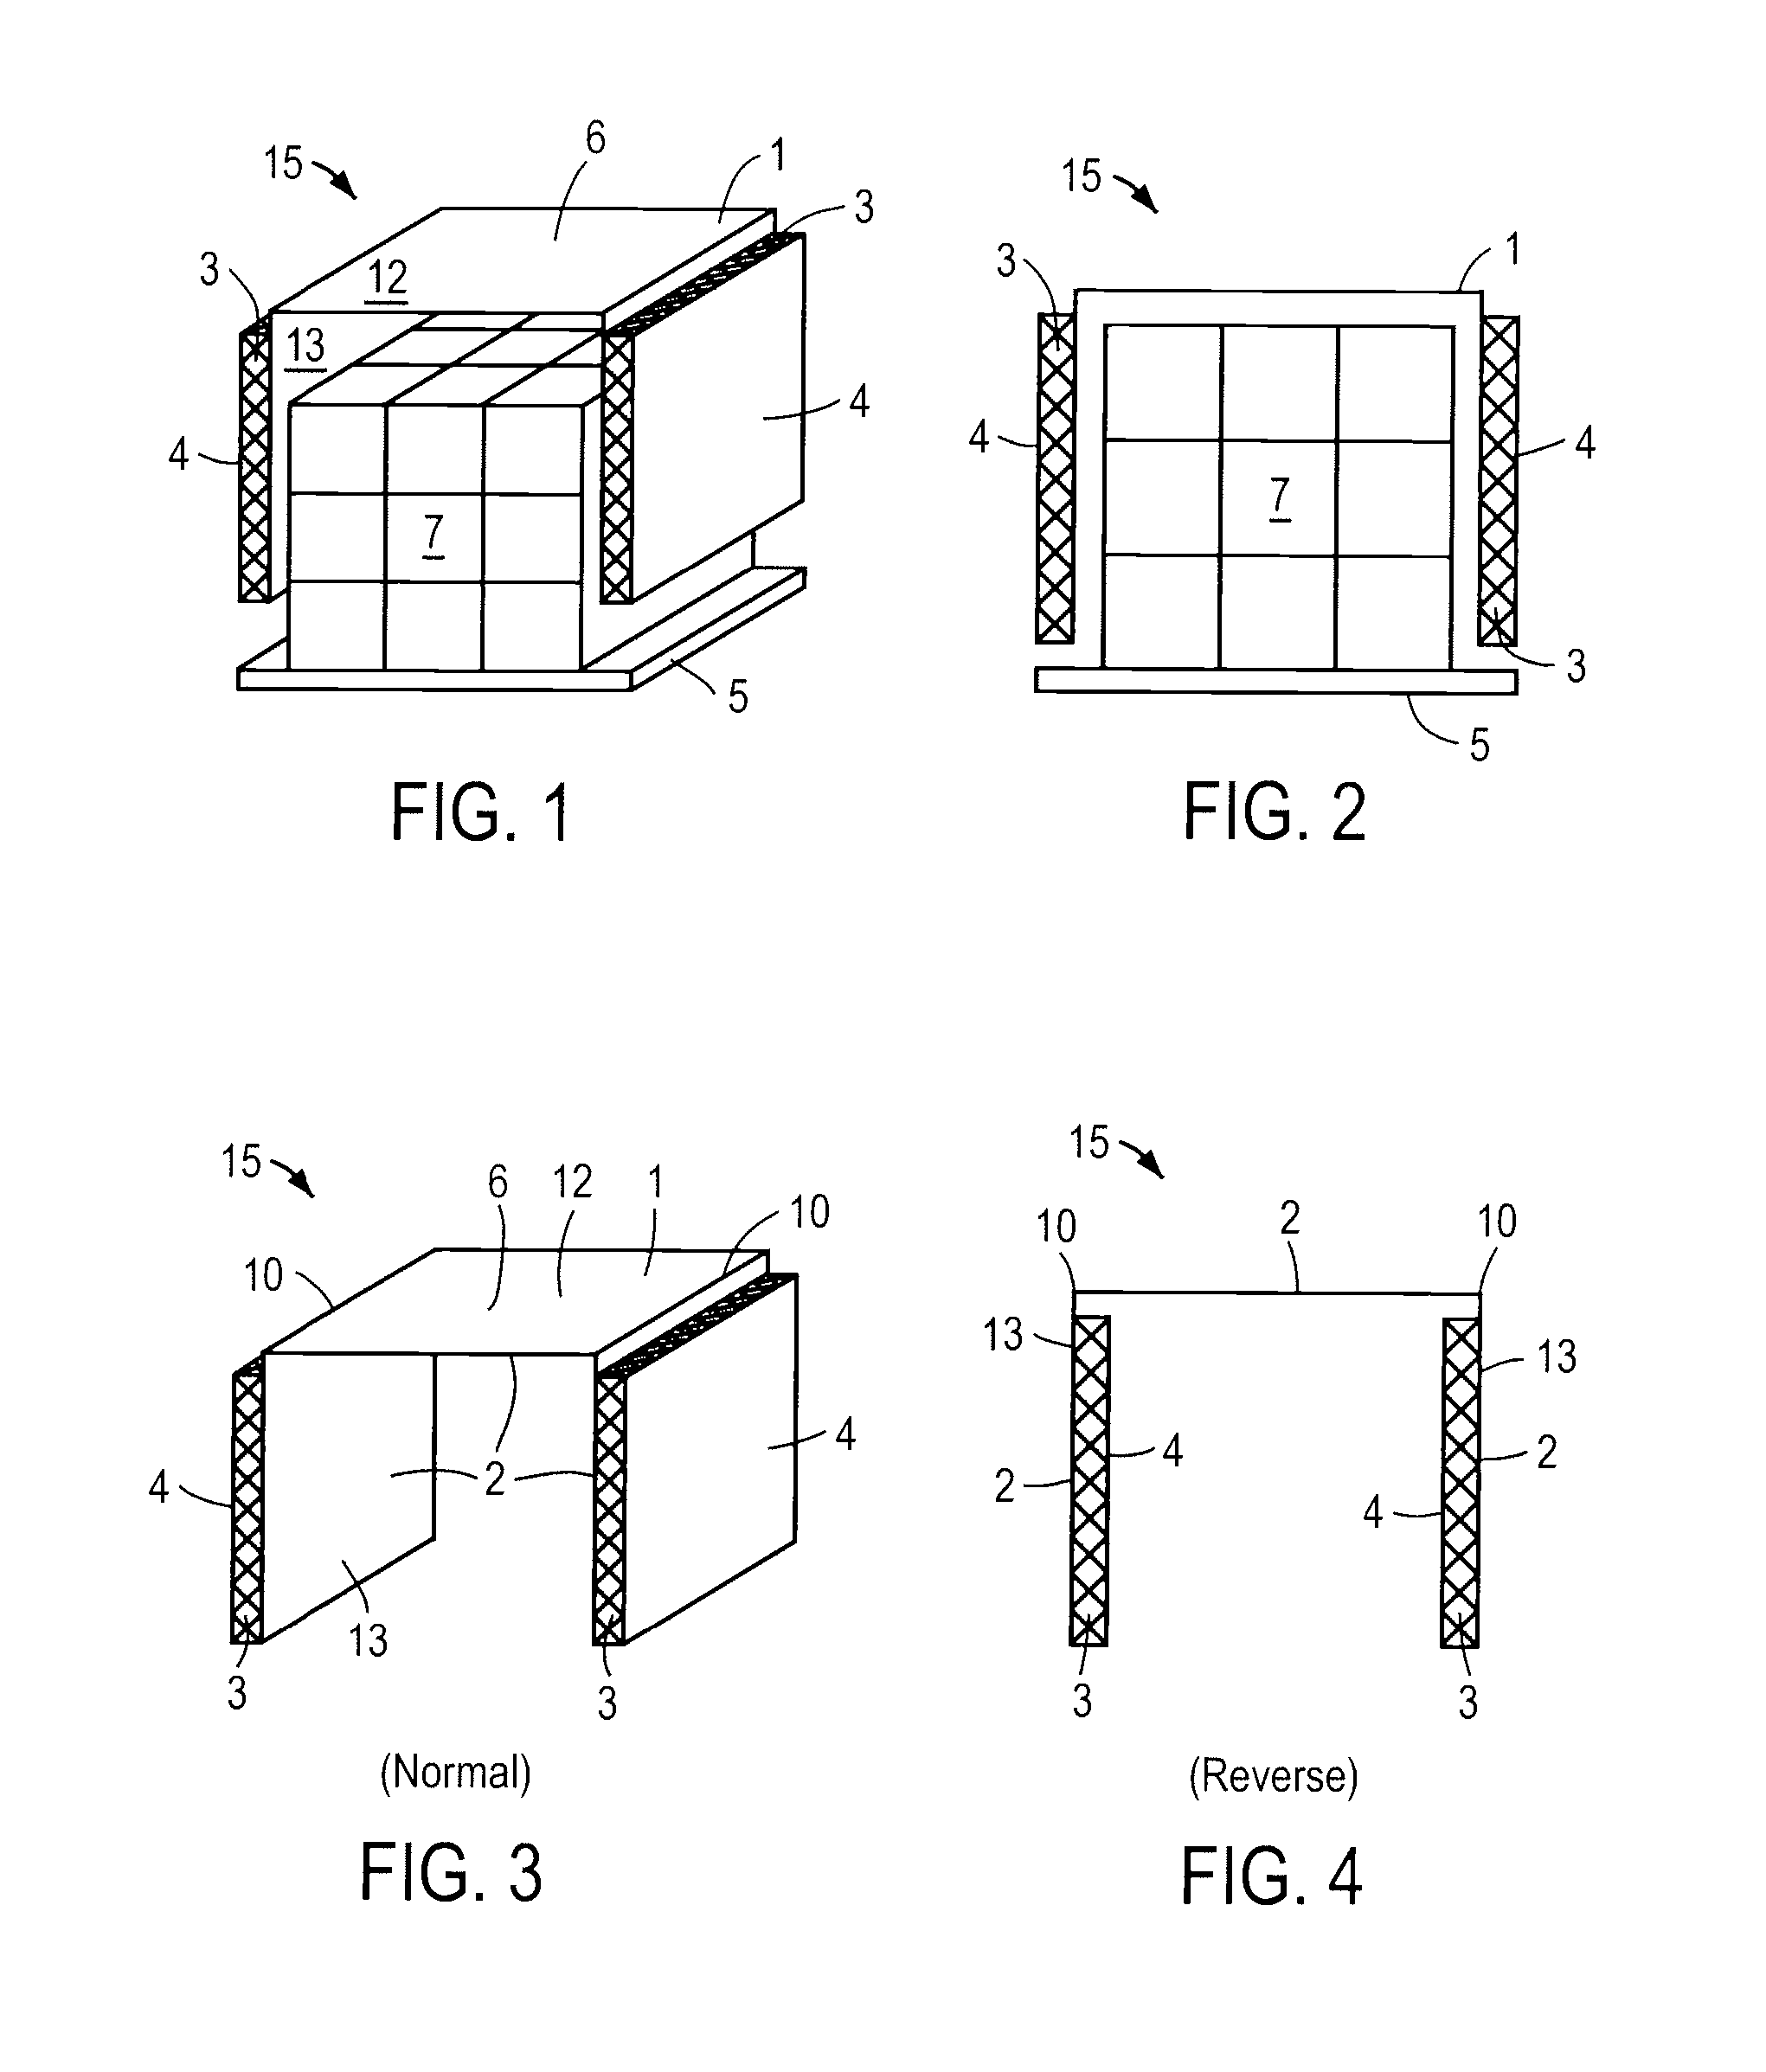 Unitary void filling apparatus for use with various pallet sizes and loads, and method of using the same